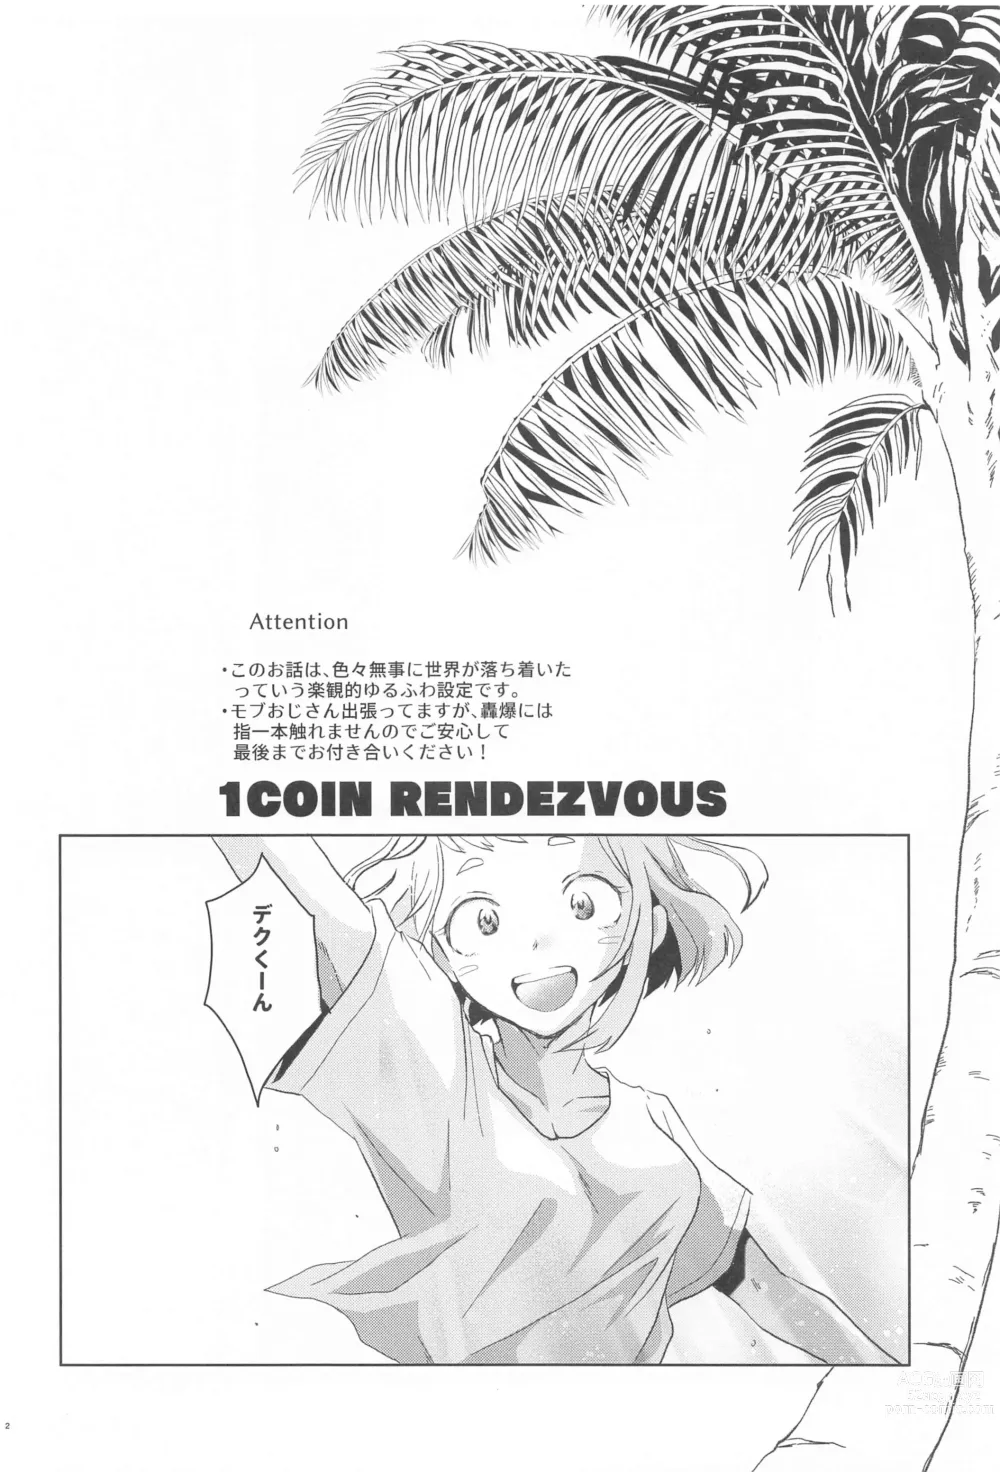 Page 2 of doujinshi 1COIN RANDEZVOUS  - 10min Limited